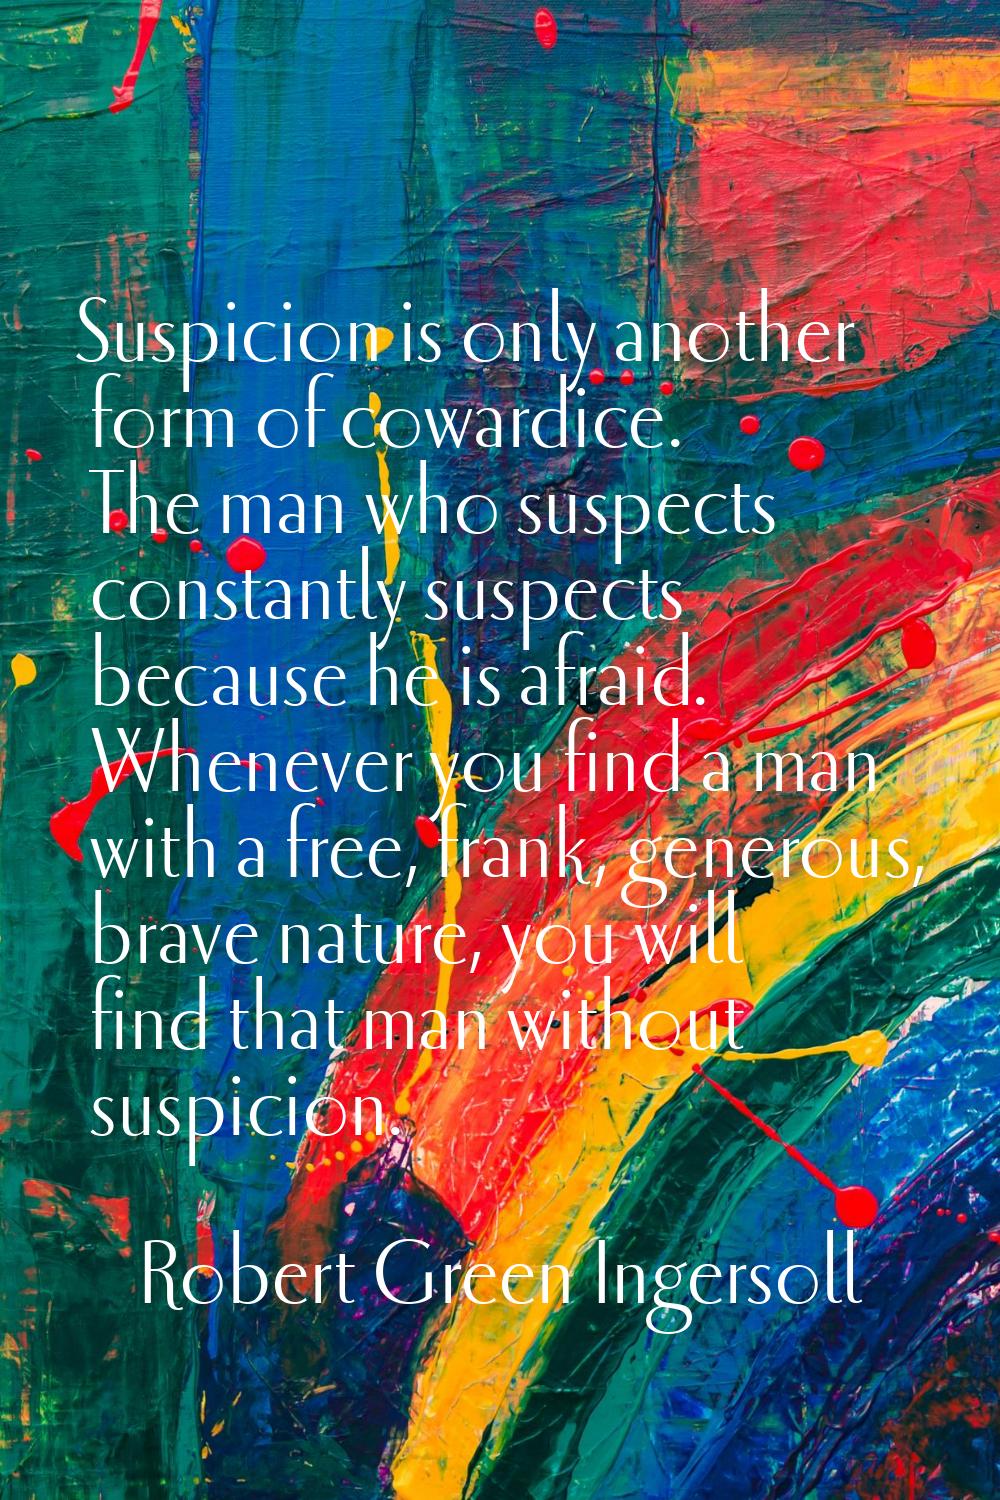 Suspicion is only another form of cowardice. The man who suspects constantly suspects because he is